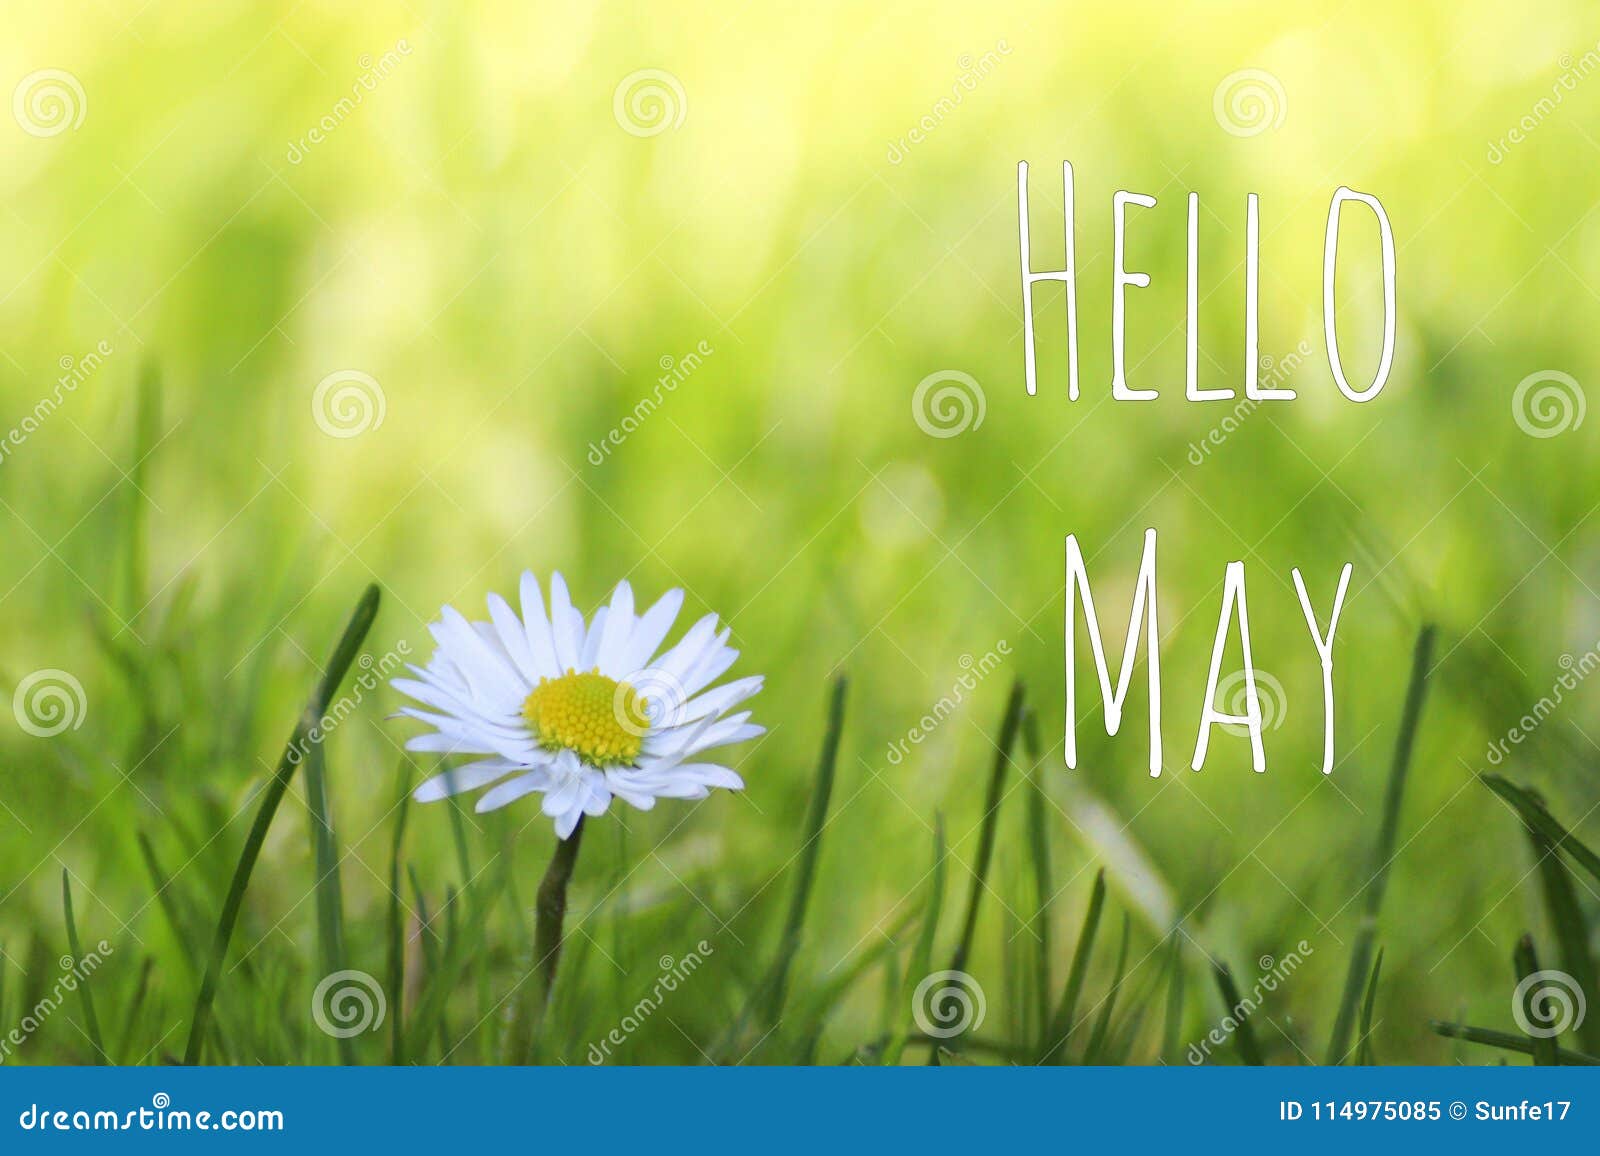 hello may text and white daisy flower on spring meadow background